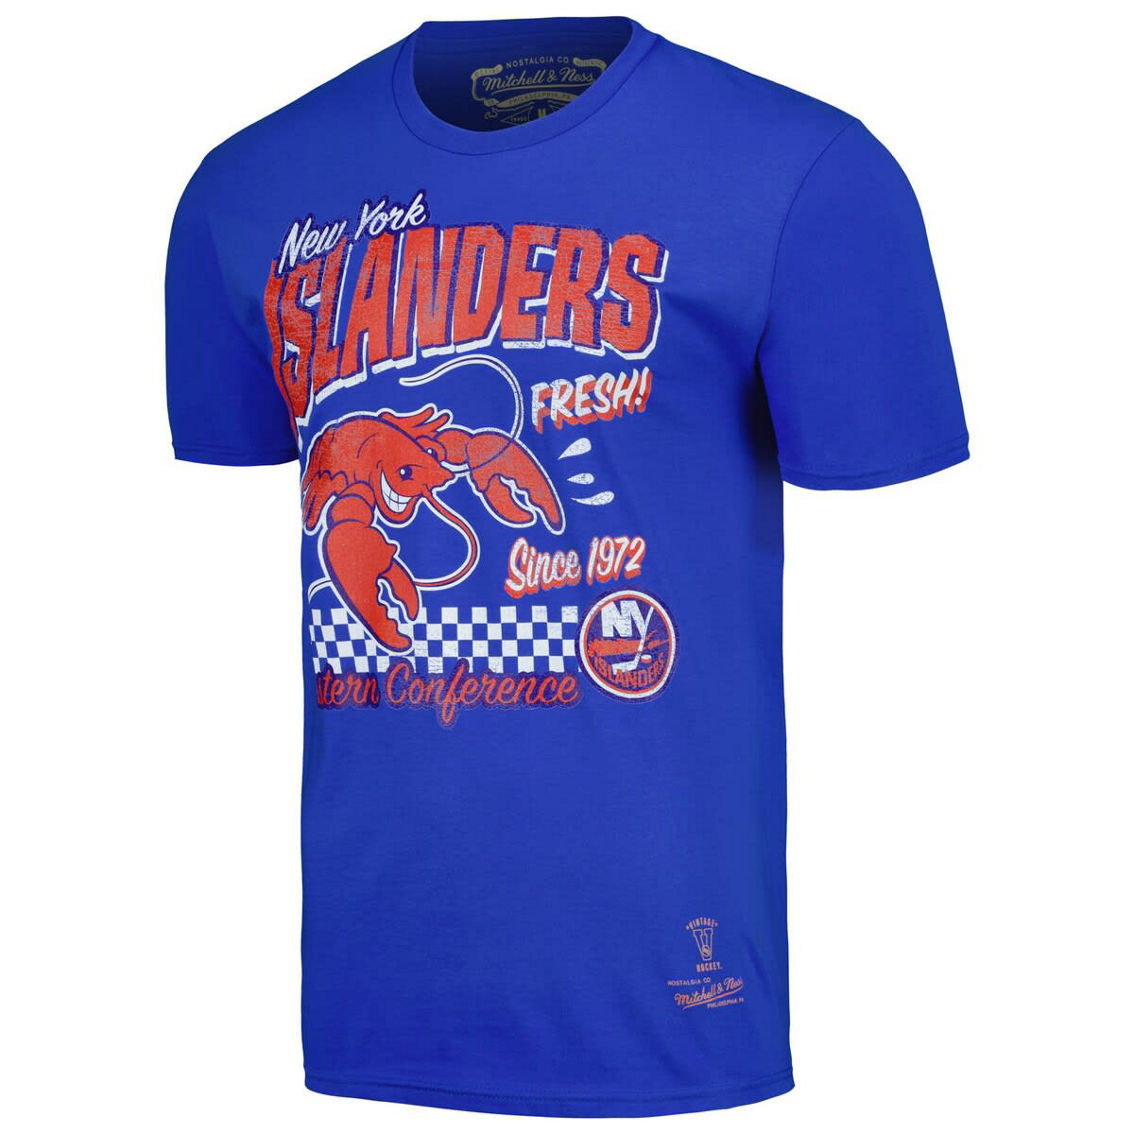 Mitchell & Ness Men's Royal New York Islanders Seafood T-Shirt - Image 3 of 4